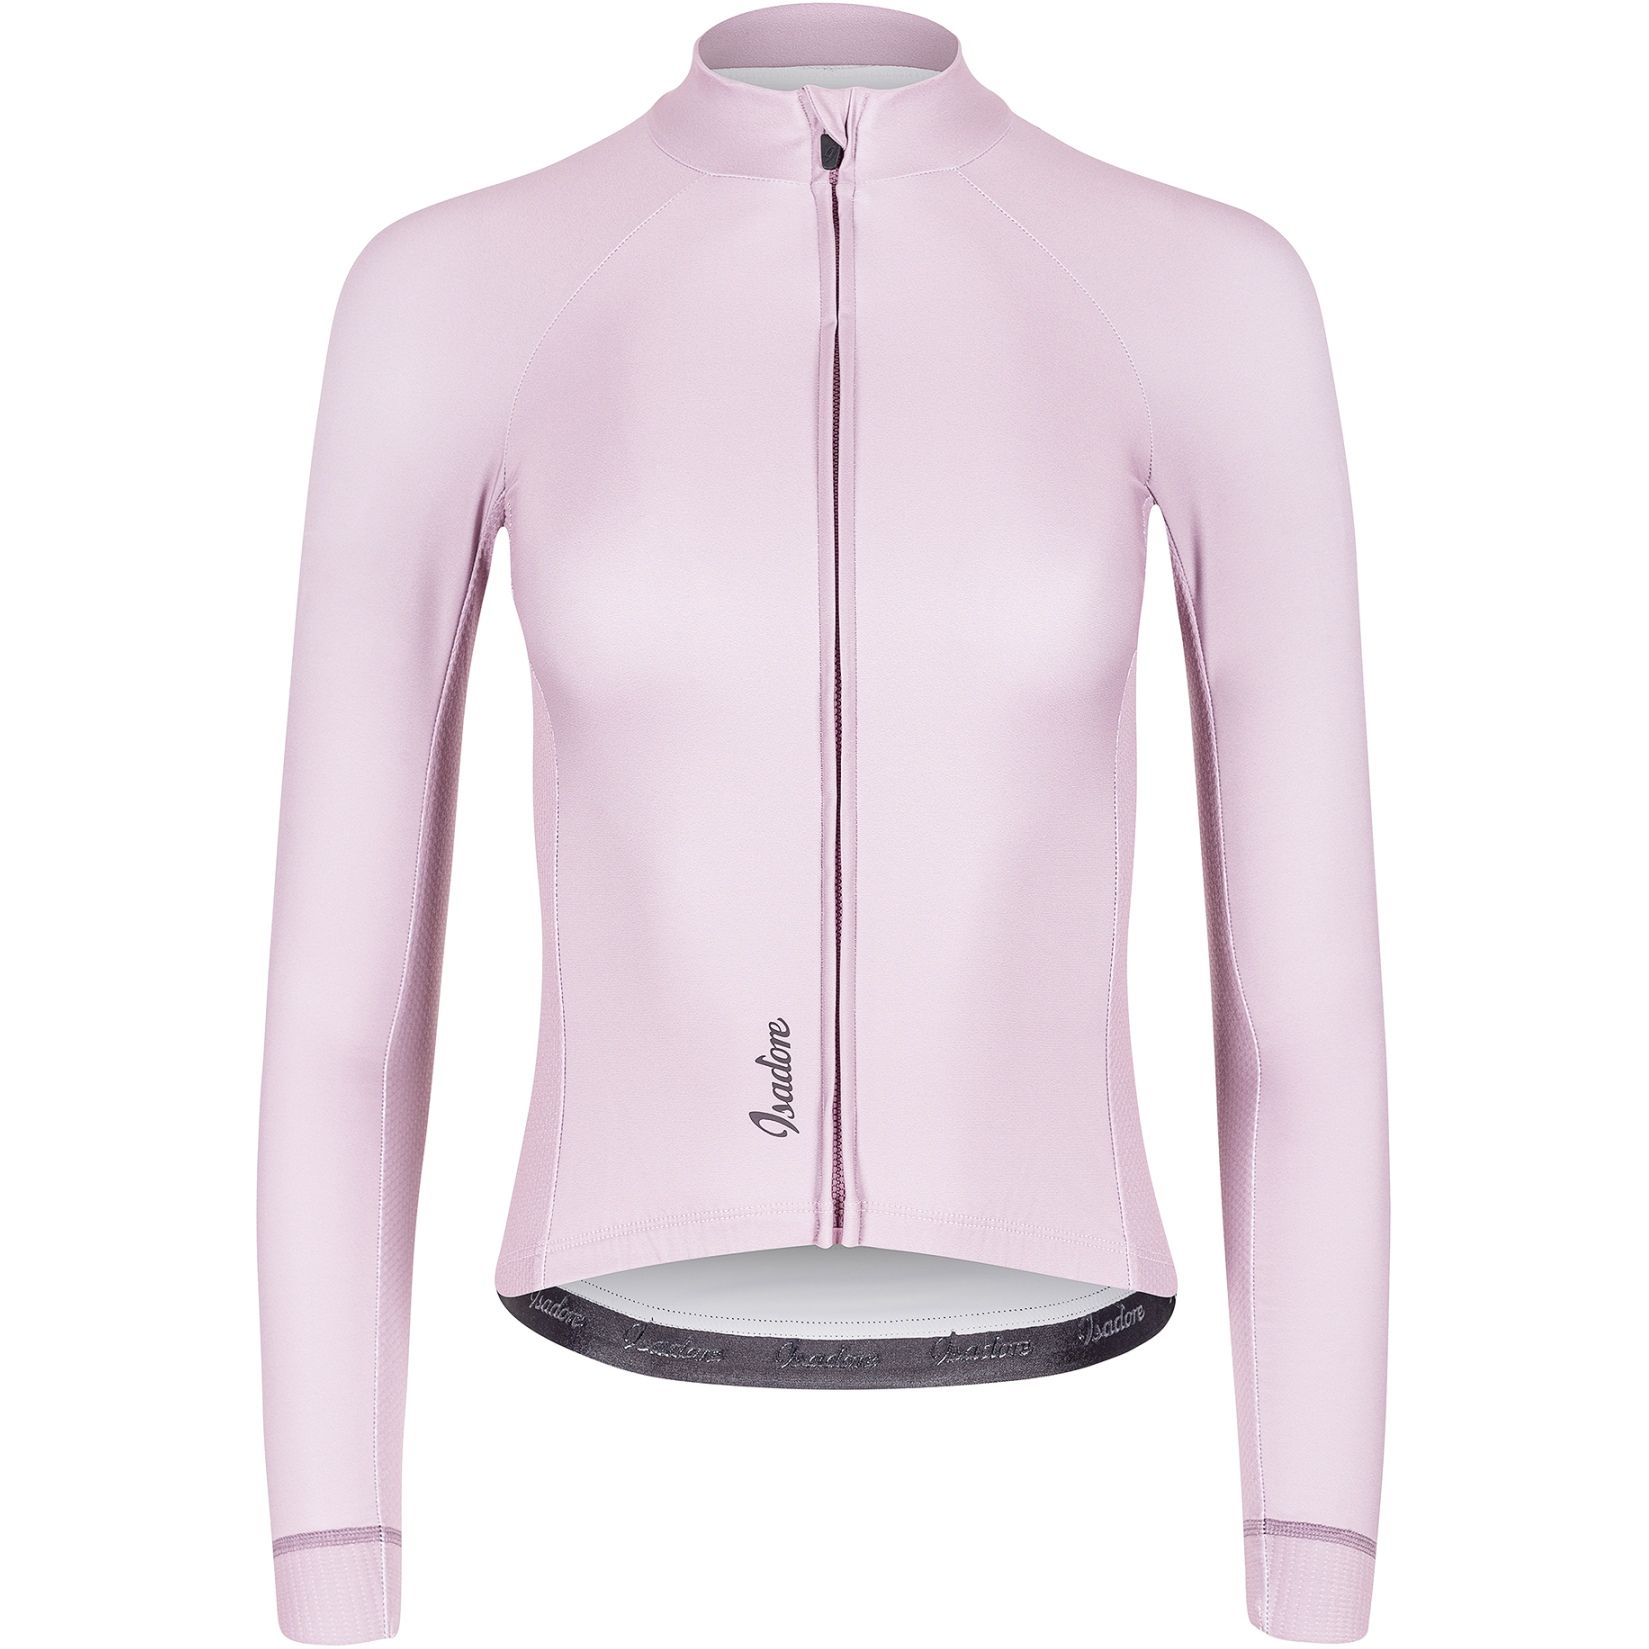 Picture of Isadore Alternative Light Long Sleeve Jersey Women - Violet Ice